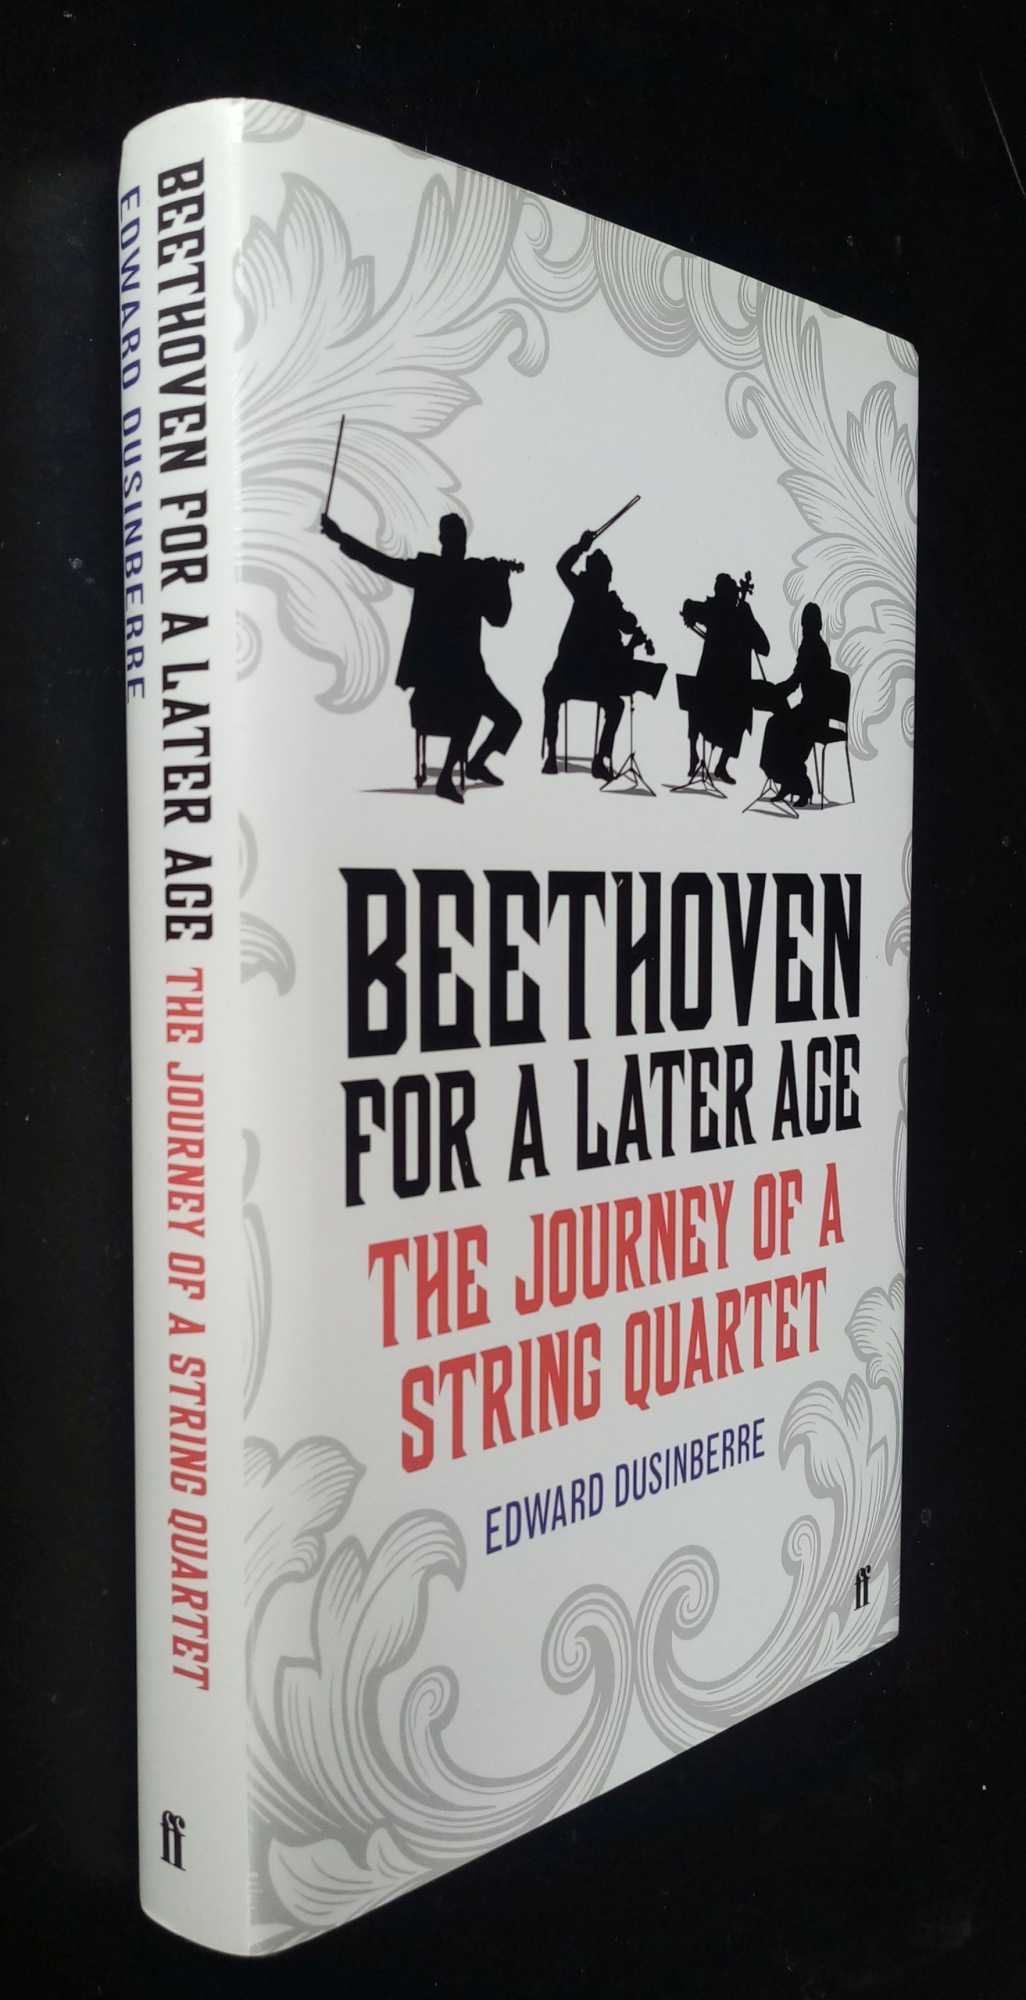 Edward Dusinberre - Beethoven for a Later Age: The Journey of a String Quartet   SIGNED